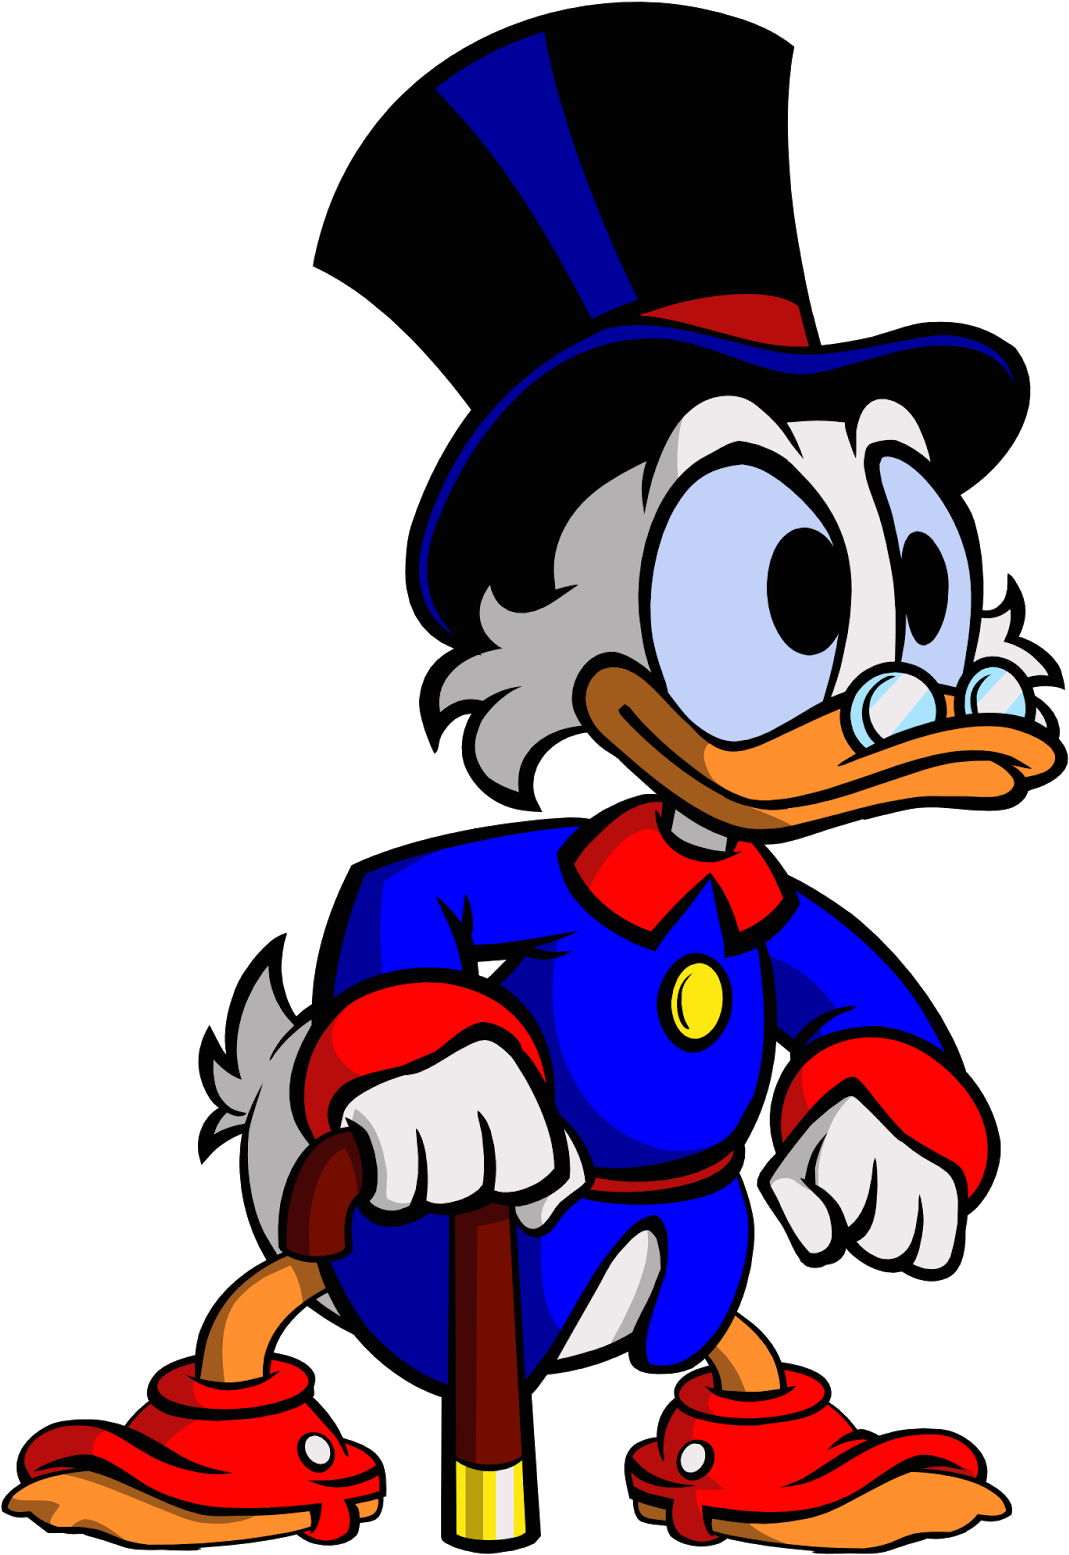 Pixels > 1600x1600, Background Isaac Flores - Scrooge Mcduck Ducktales Remastered Clipart (1600x1600), Png Download